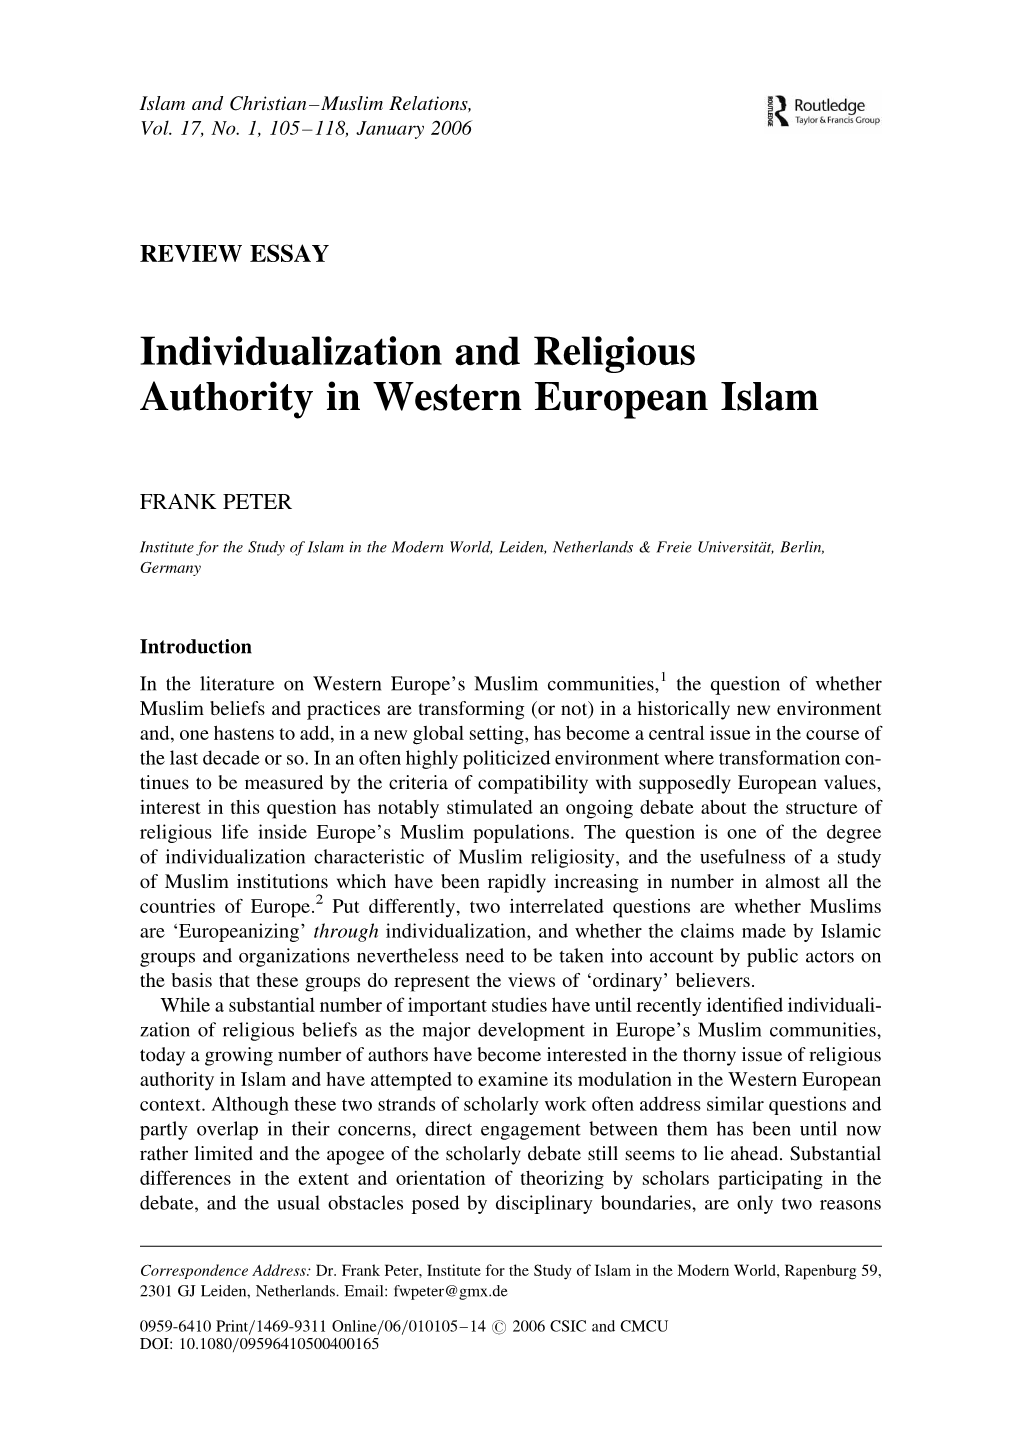 Individualization and Religious Authority in Western European Islam